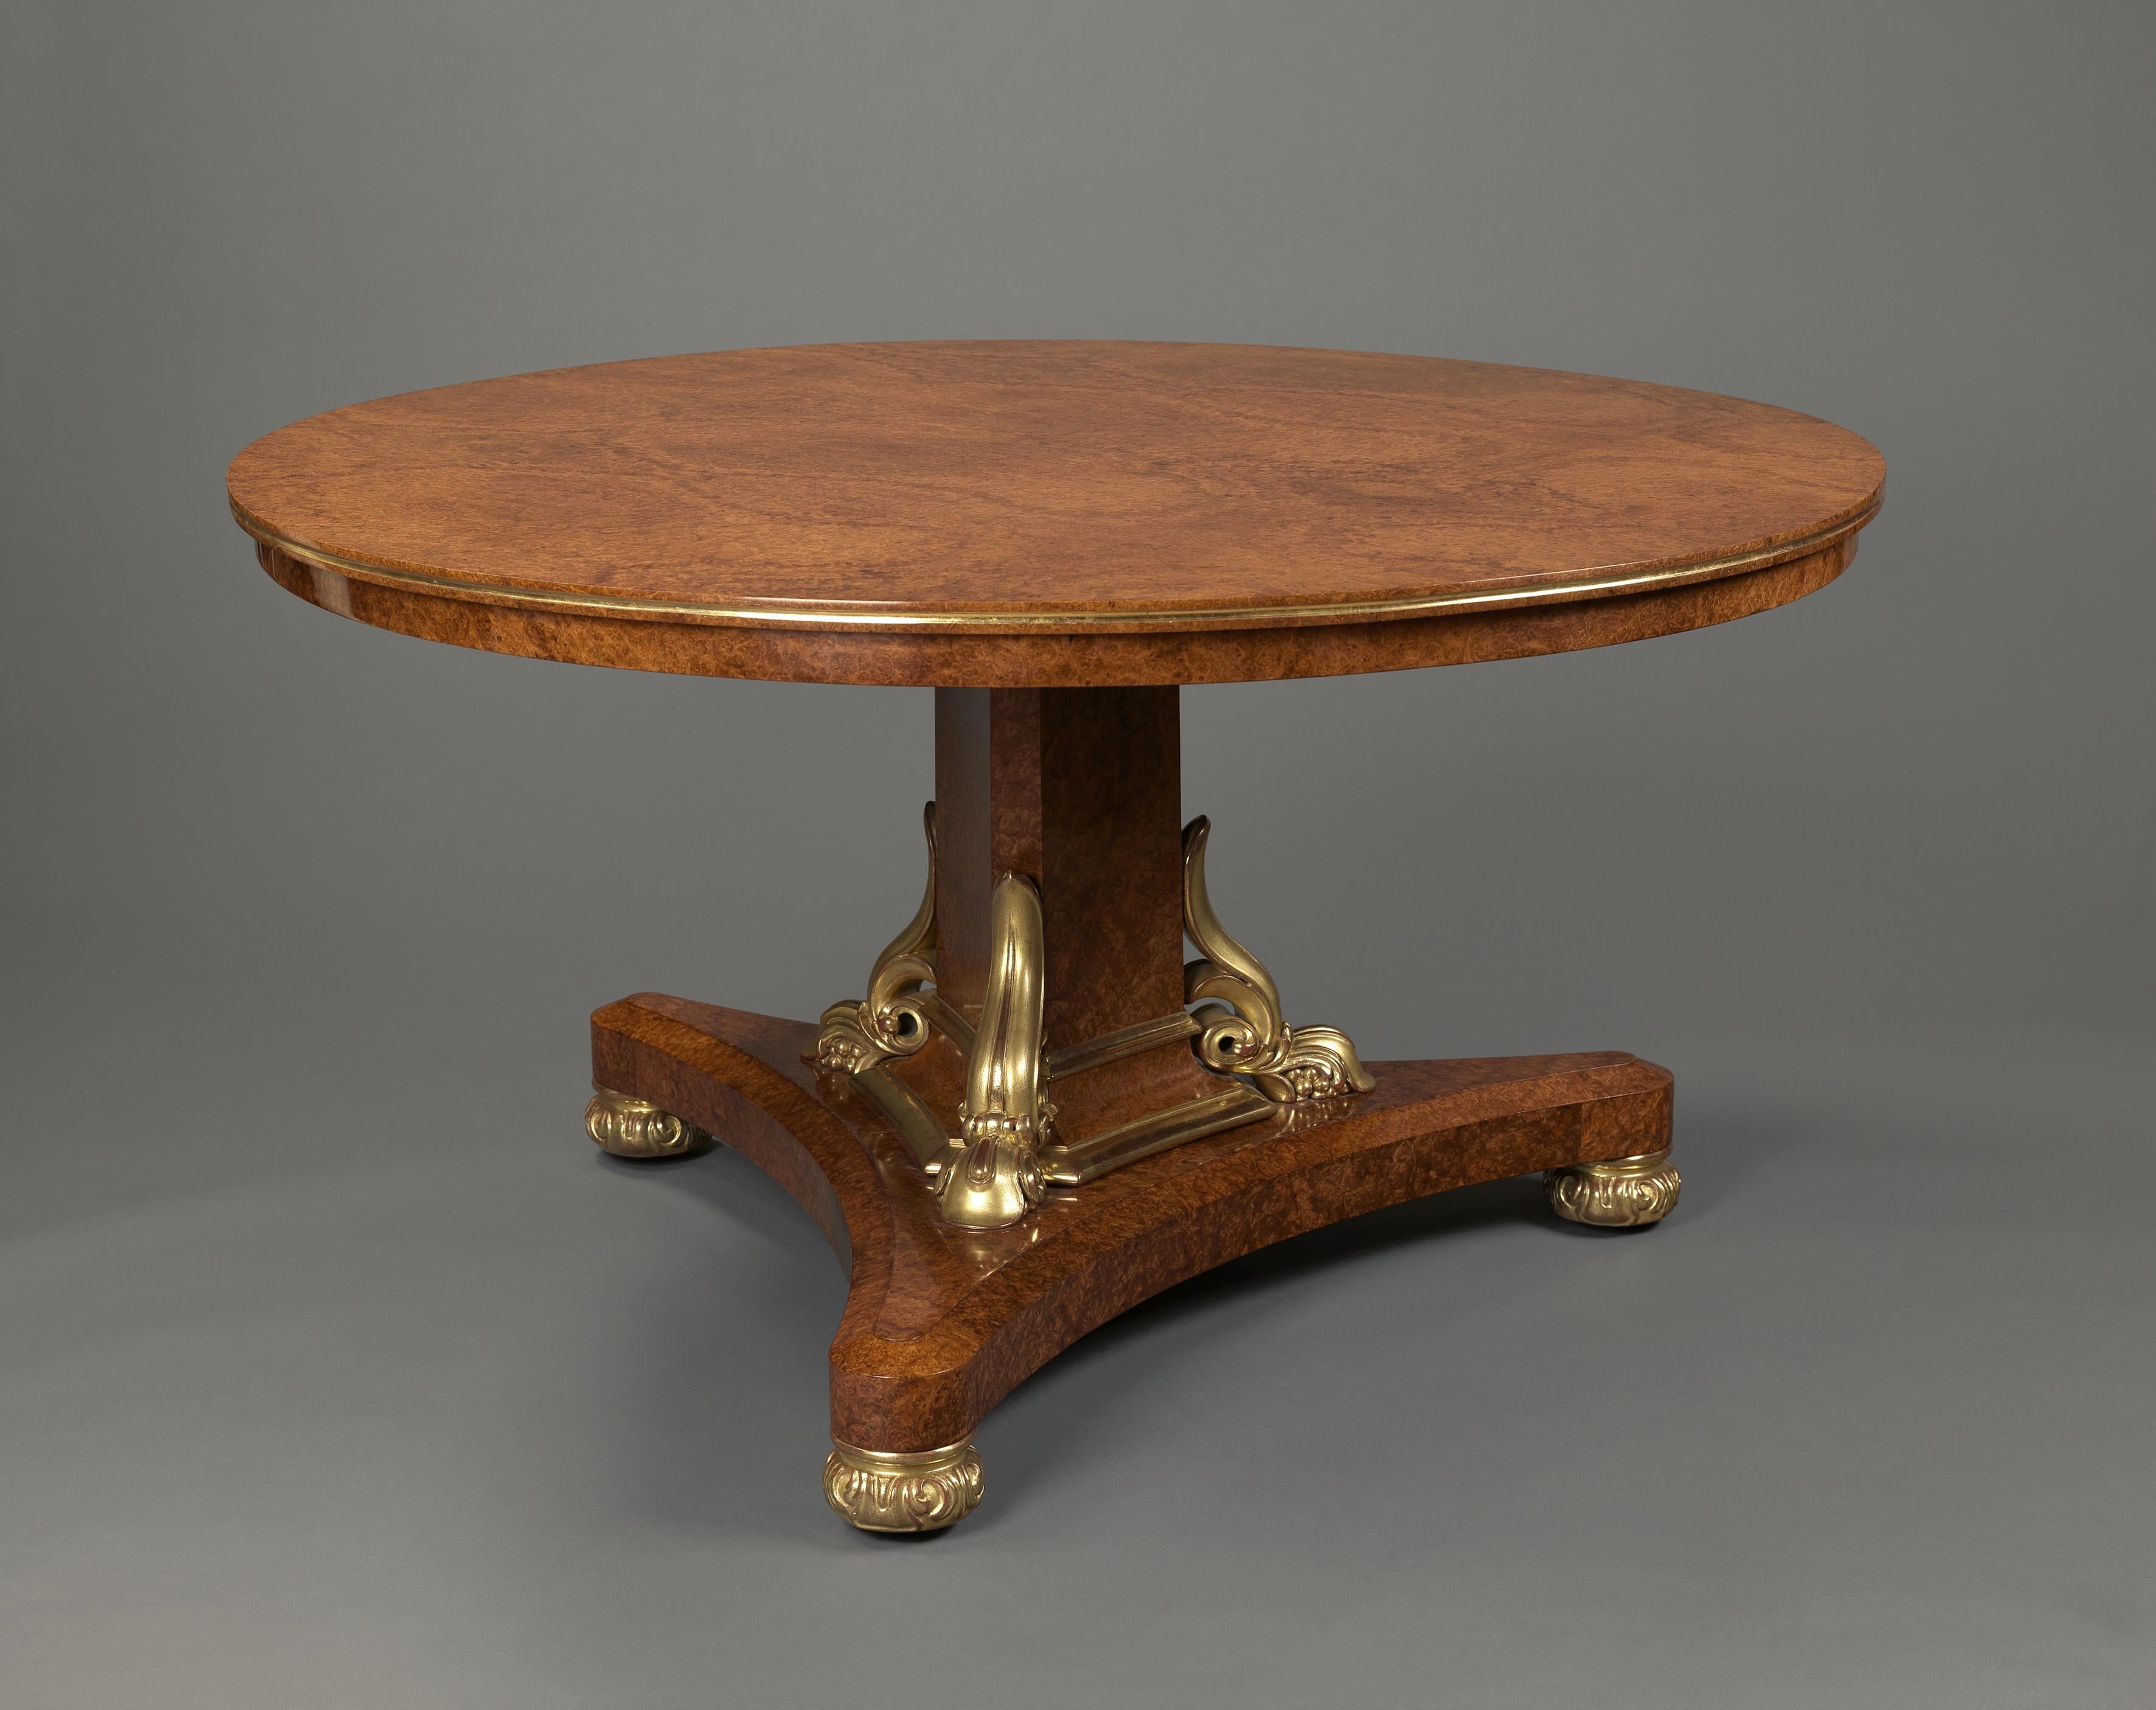 A Very Fine George IV Parcel-Gilt Amboyna Centre Table Attributed to Thomas & George Seddon. 

English, Circa 1830. 

The table is of finely figured Amboyna with a circular tilt-top above a triform column with parcel-gilt scrolled supports.  It is